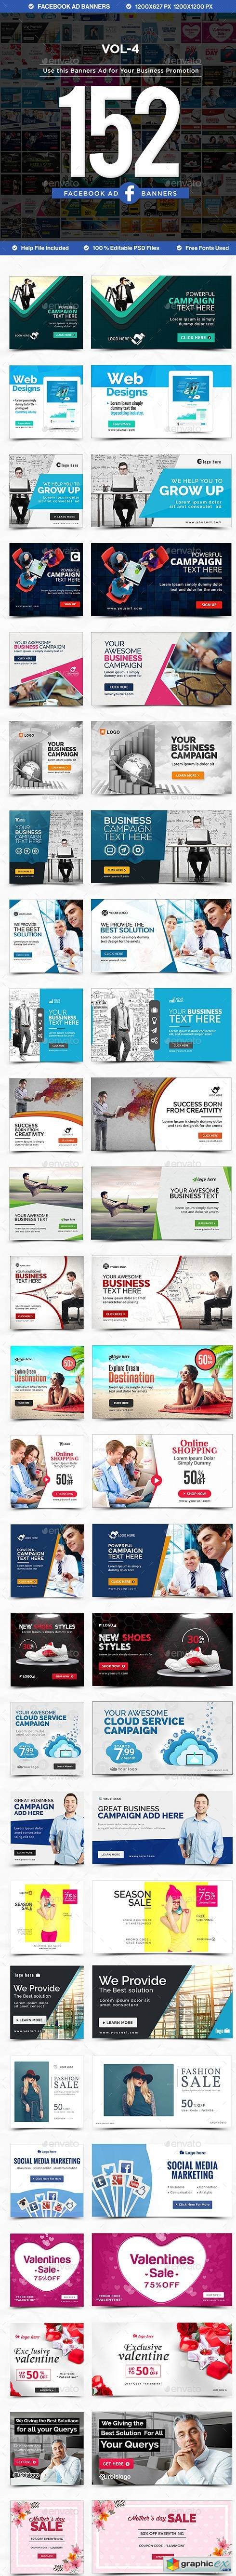 Facebook Newsfeed Ad Banners Vol-4 - 152 Banners